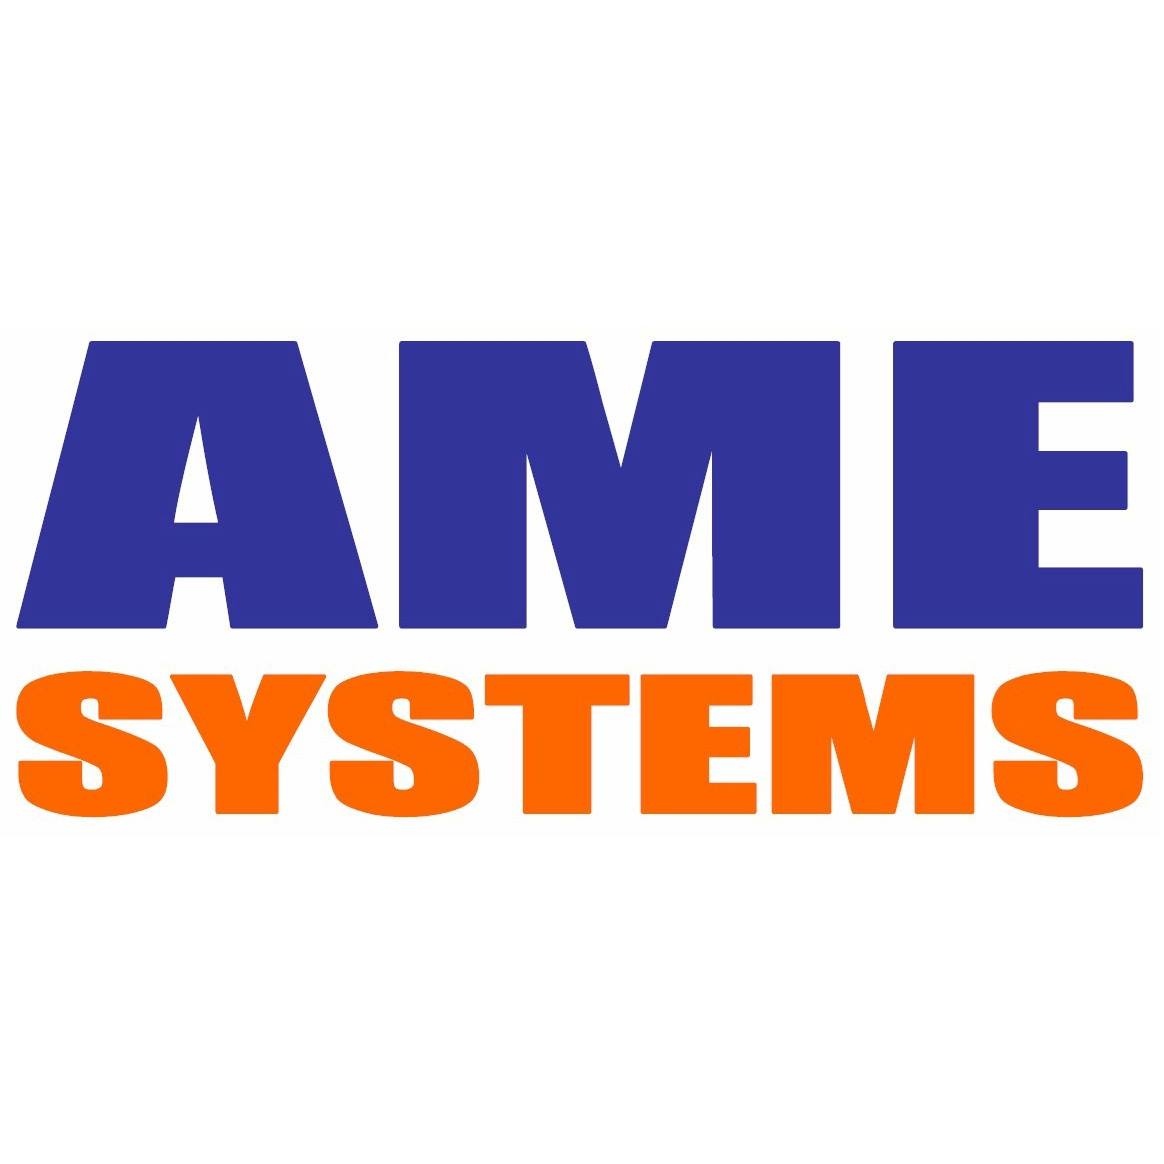 AME Systems